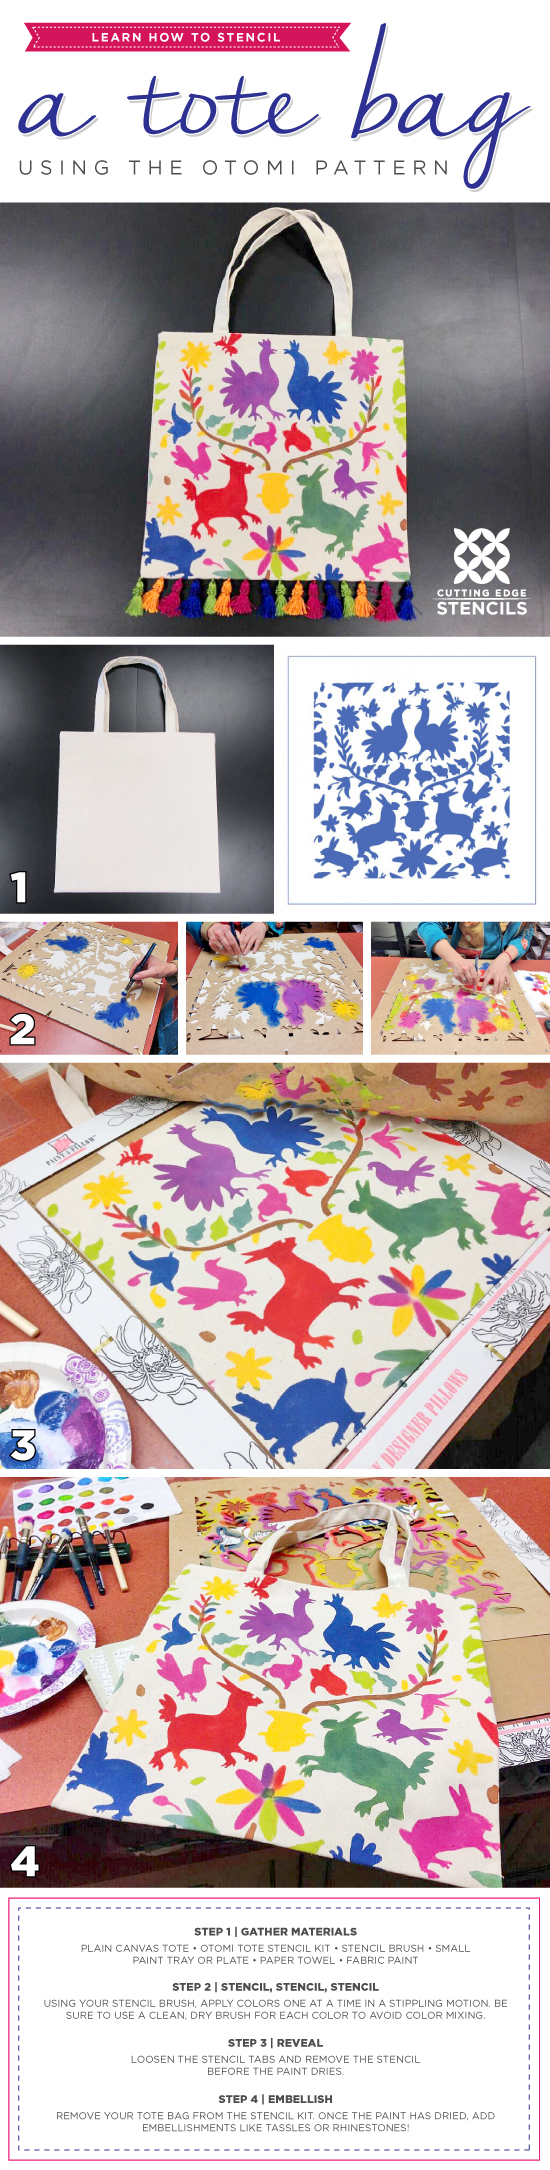 Cutting Edge Stencils shares a stencil tutorial on how to paint a DIY cotton tote bag using the Otomi Tribal Stencil. http://www.cuttingedgestencils.com/otomi-stencil-paint-a-pillow-kit.html